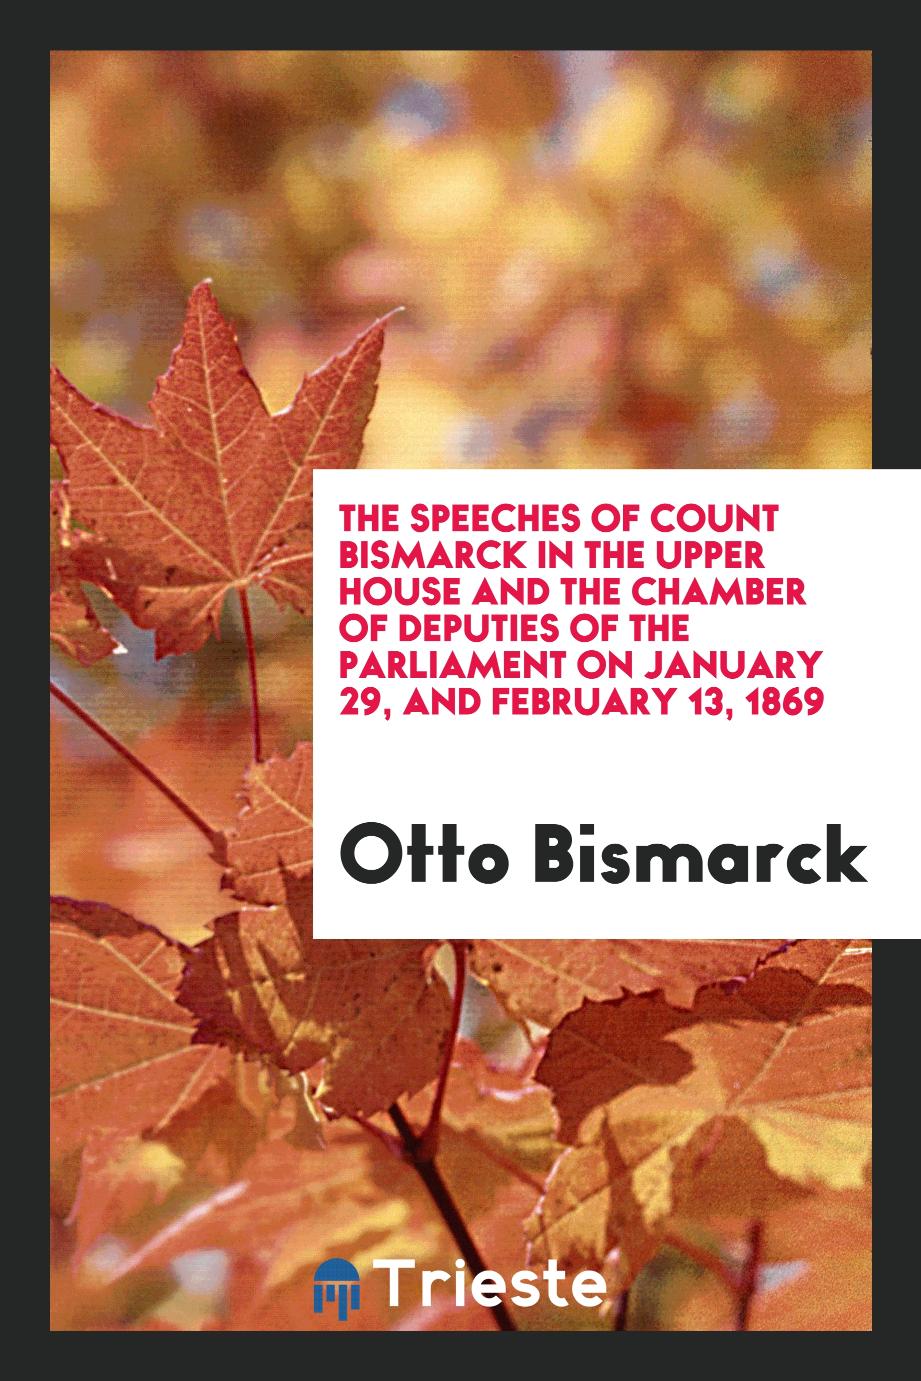 The Speeches of Count Bismarck in the Upper House and the Chamber of Deputies of the Parliament on January 29, and February 13, 1869